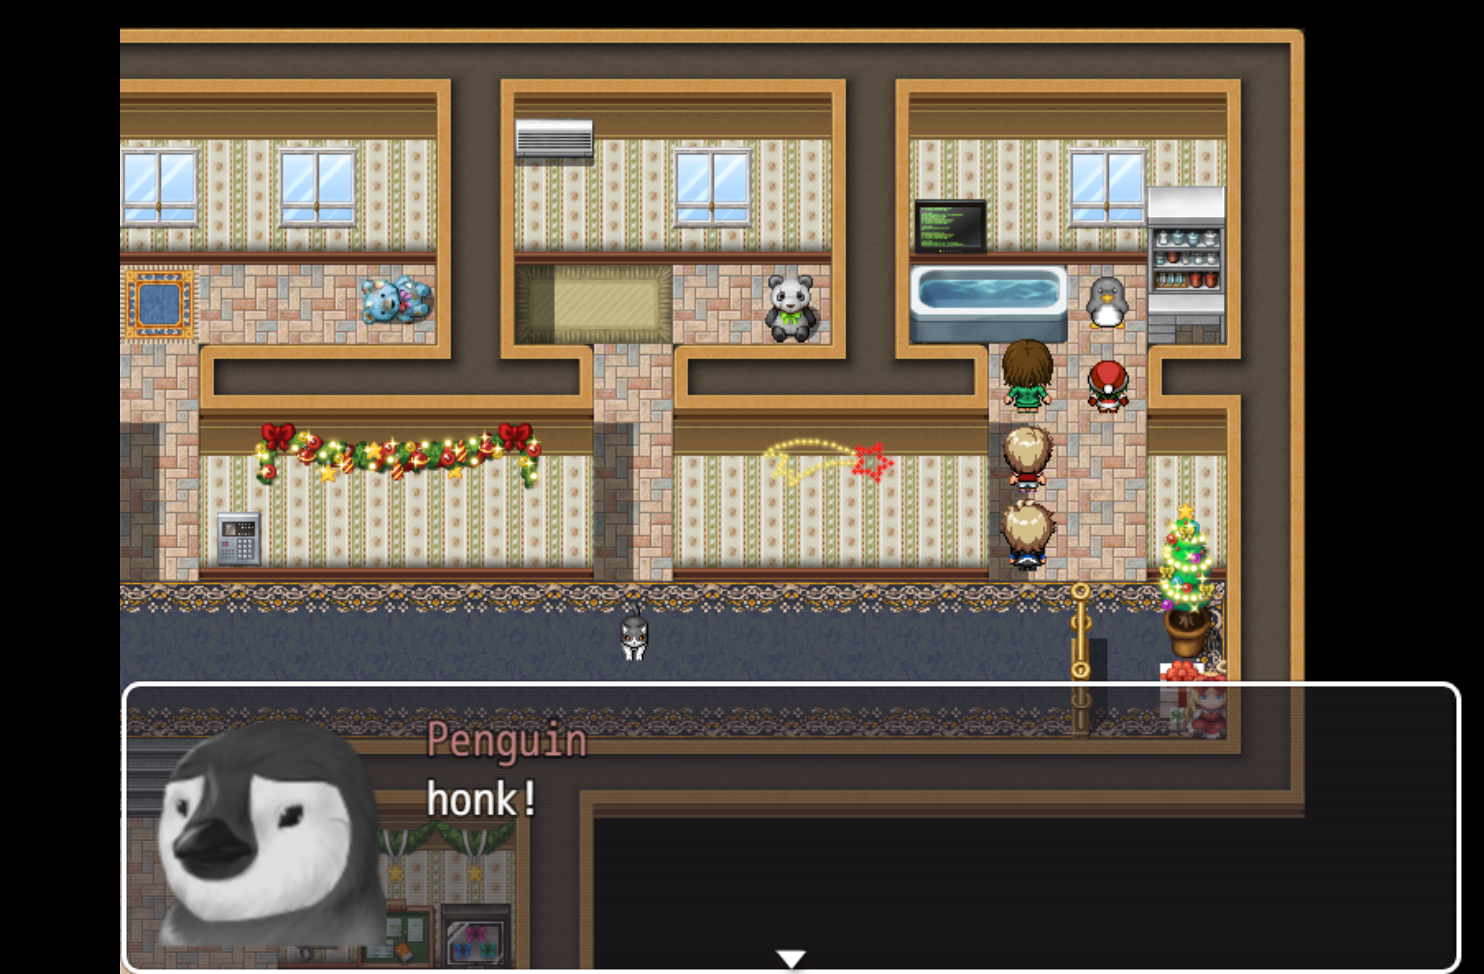 a classic 2D RPG with a party of characters talking to a worried looking penguin who says "honk" 